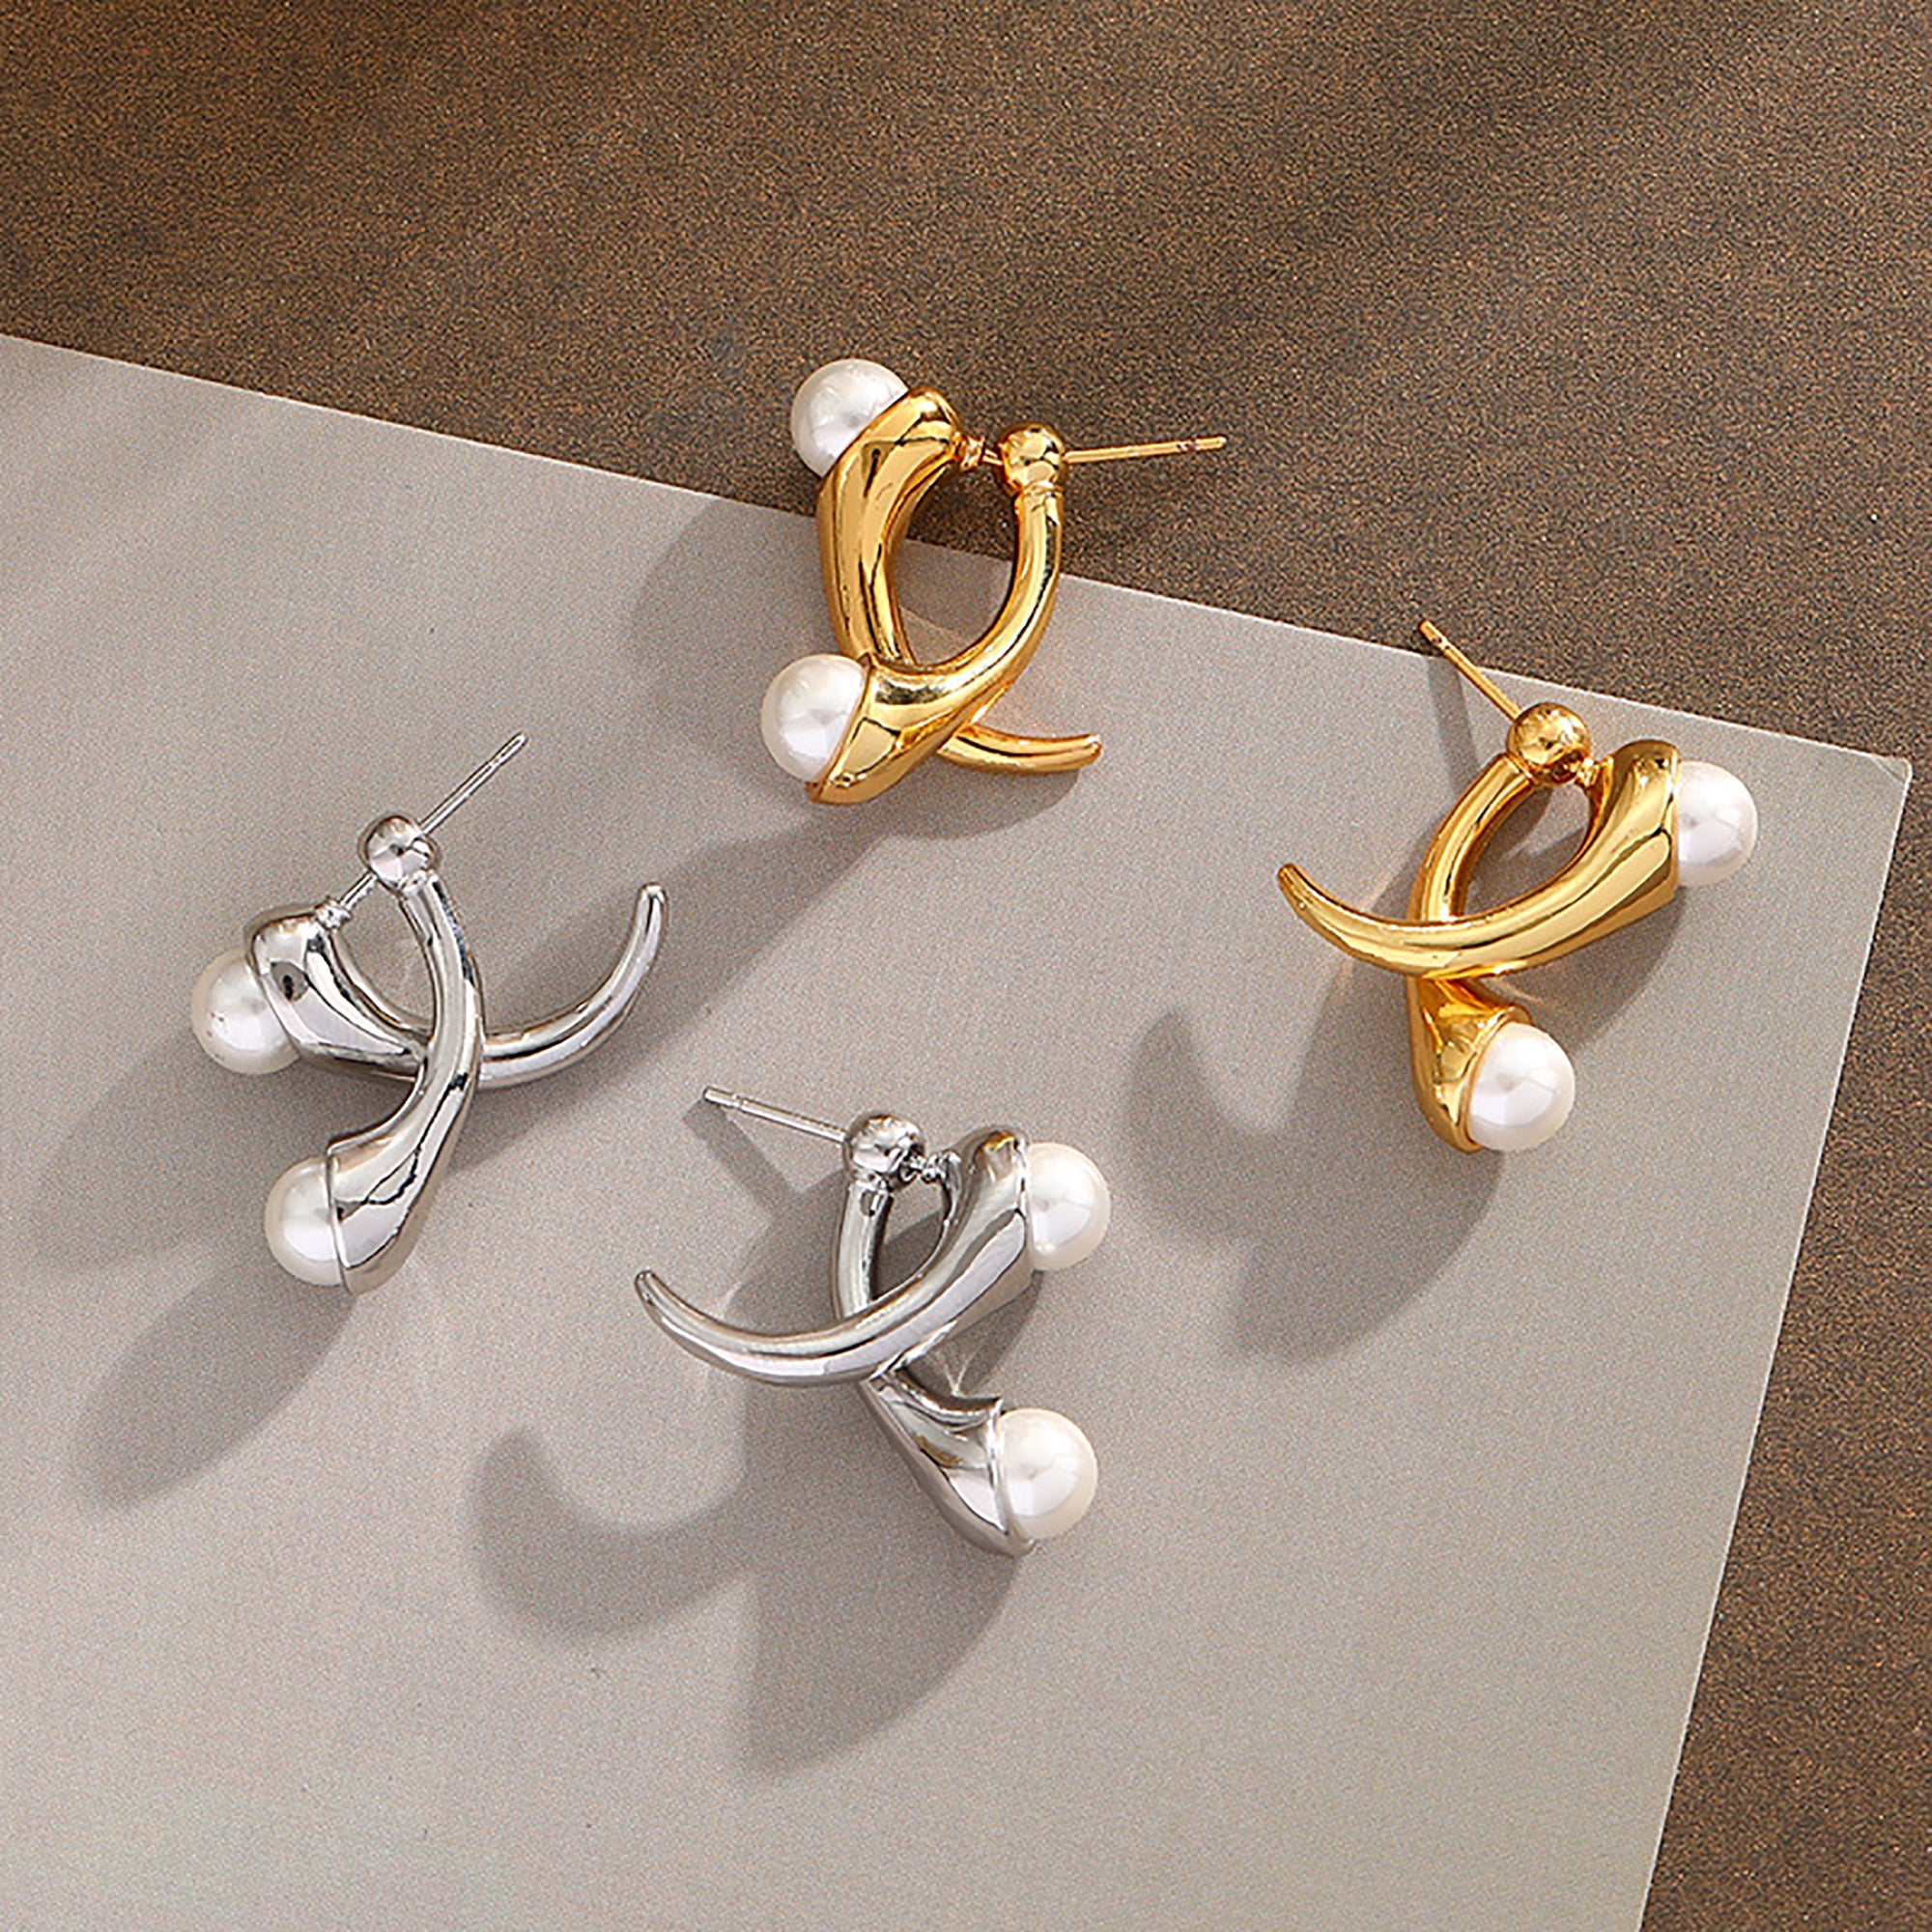 Gold Plated w/ Peal Double Side Designer Earrings Valentine Day Gift birthday party anniversary